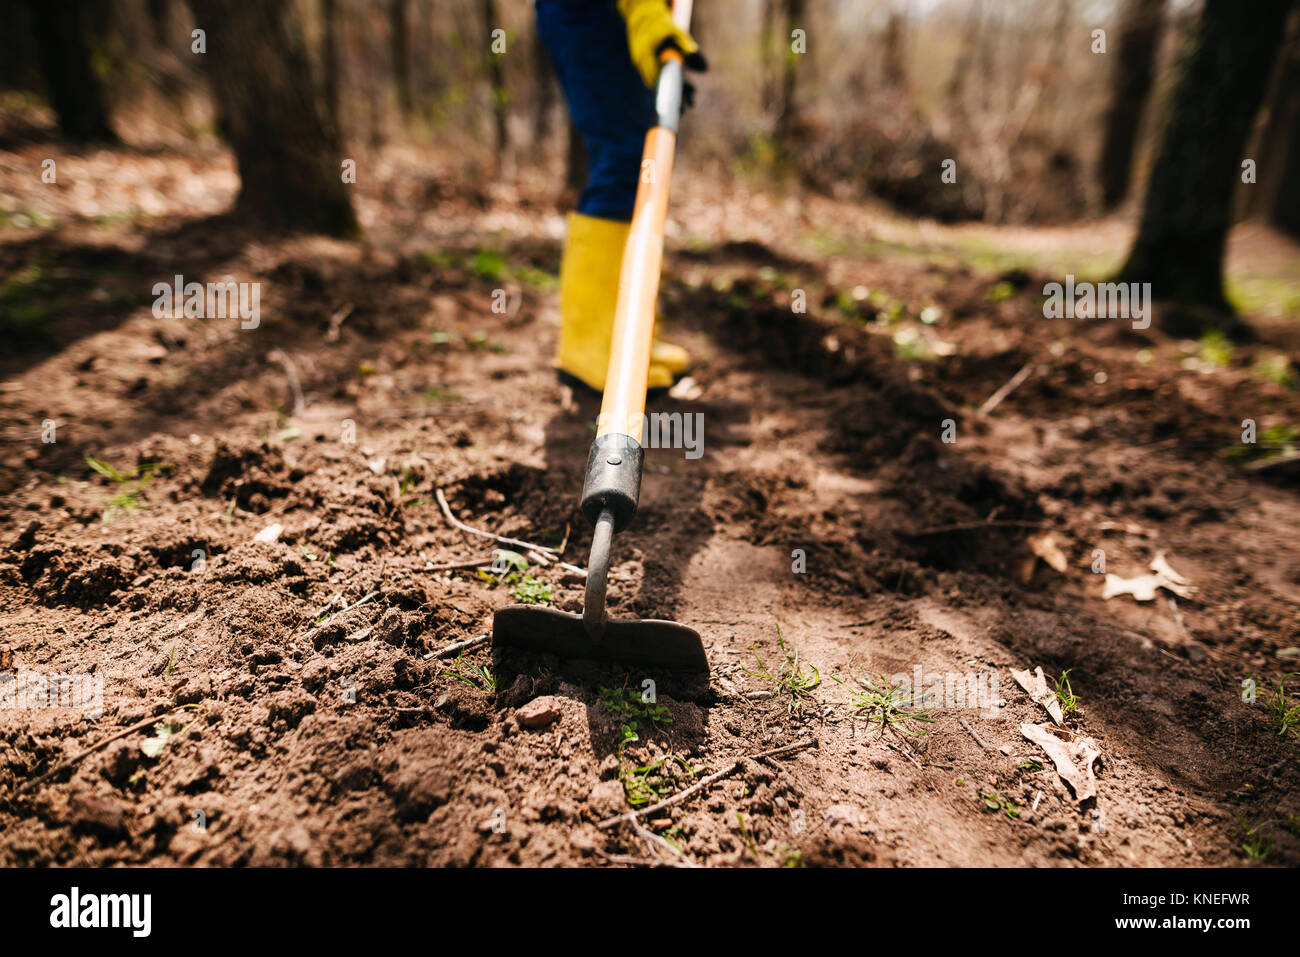 Boy digging the soil with a hoe Stock Photo